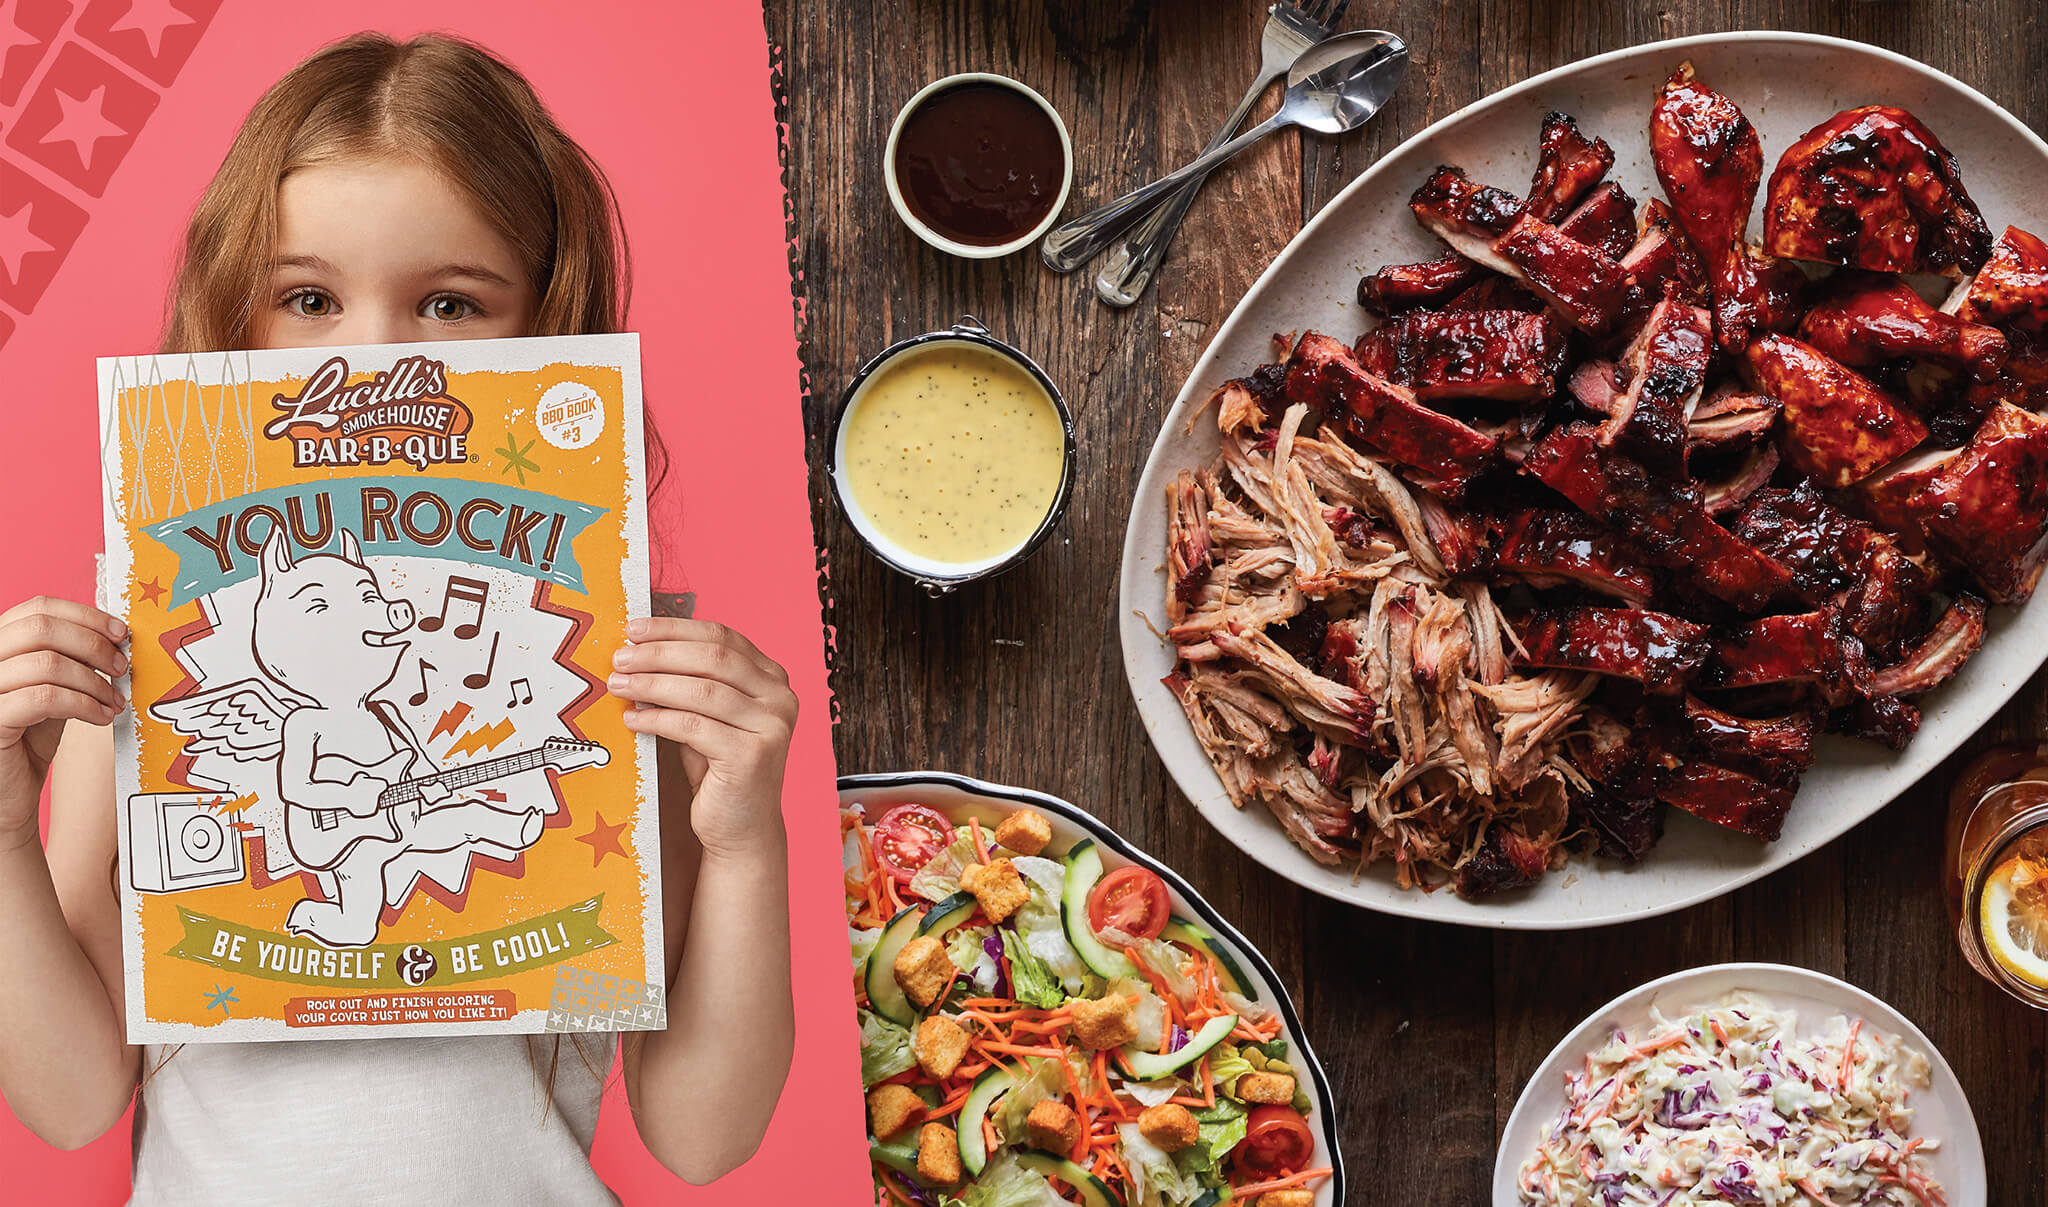 B-B-Q &amp; A: 3 Questions with Joan Hanson, VP Marketing for Lucille’s Smokehouse Bar-B-Que